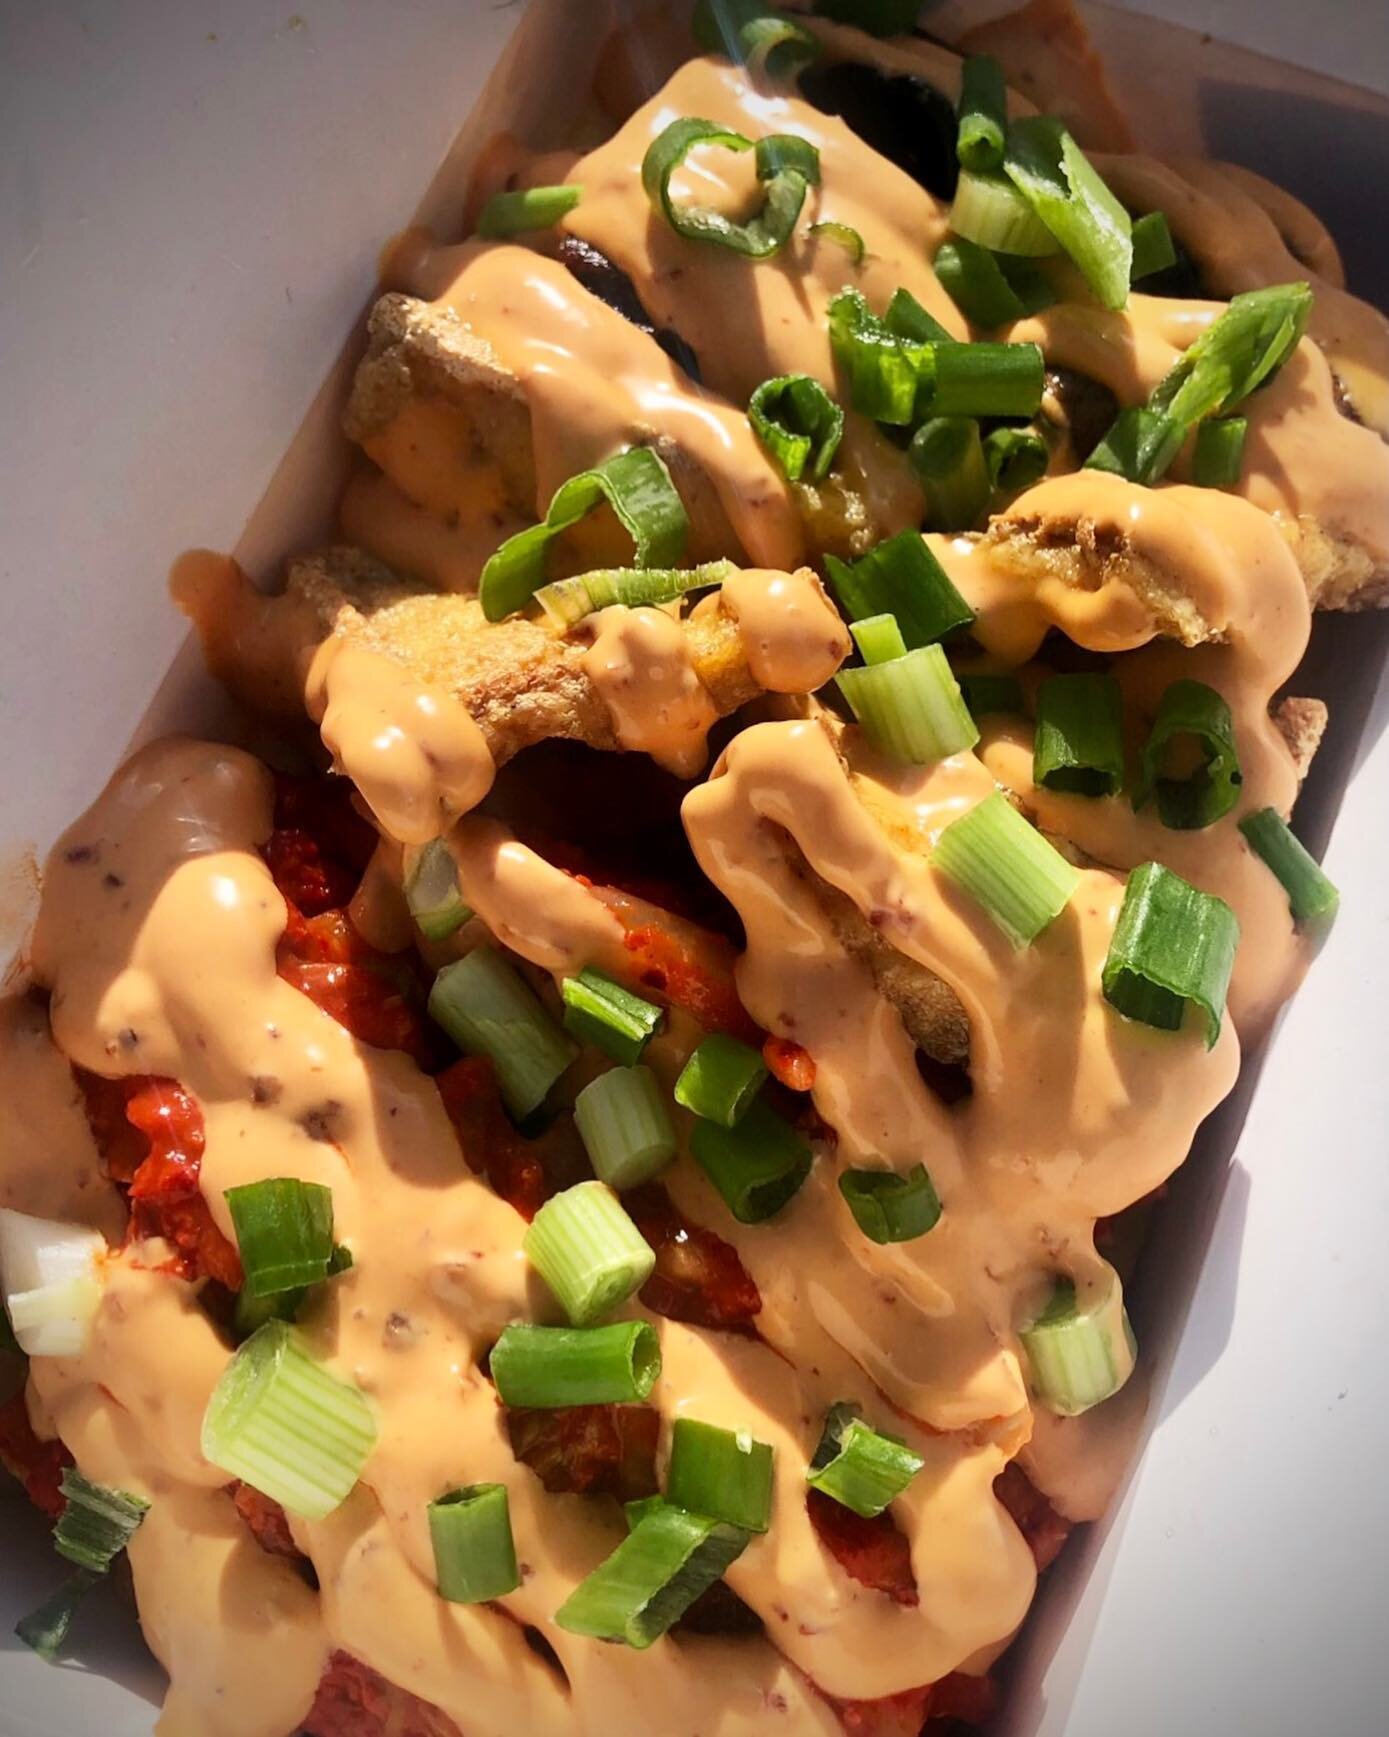 Quick lunch? 
Dirty Fries with our homemade Kimchi😍
&bull; Tofu &amp; Mushroom
&bull; Beef
&bull; Chicken 
&mdash;&mdash;&mdash;
#dirtyfries #loadedfries #chipotlemayo #streetfood #asianfood #koreanfood #fusionfood #fusioncuisine #lunch #bristol #br